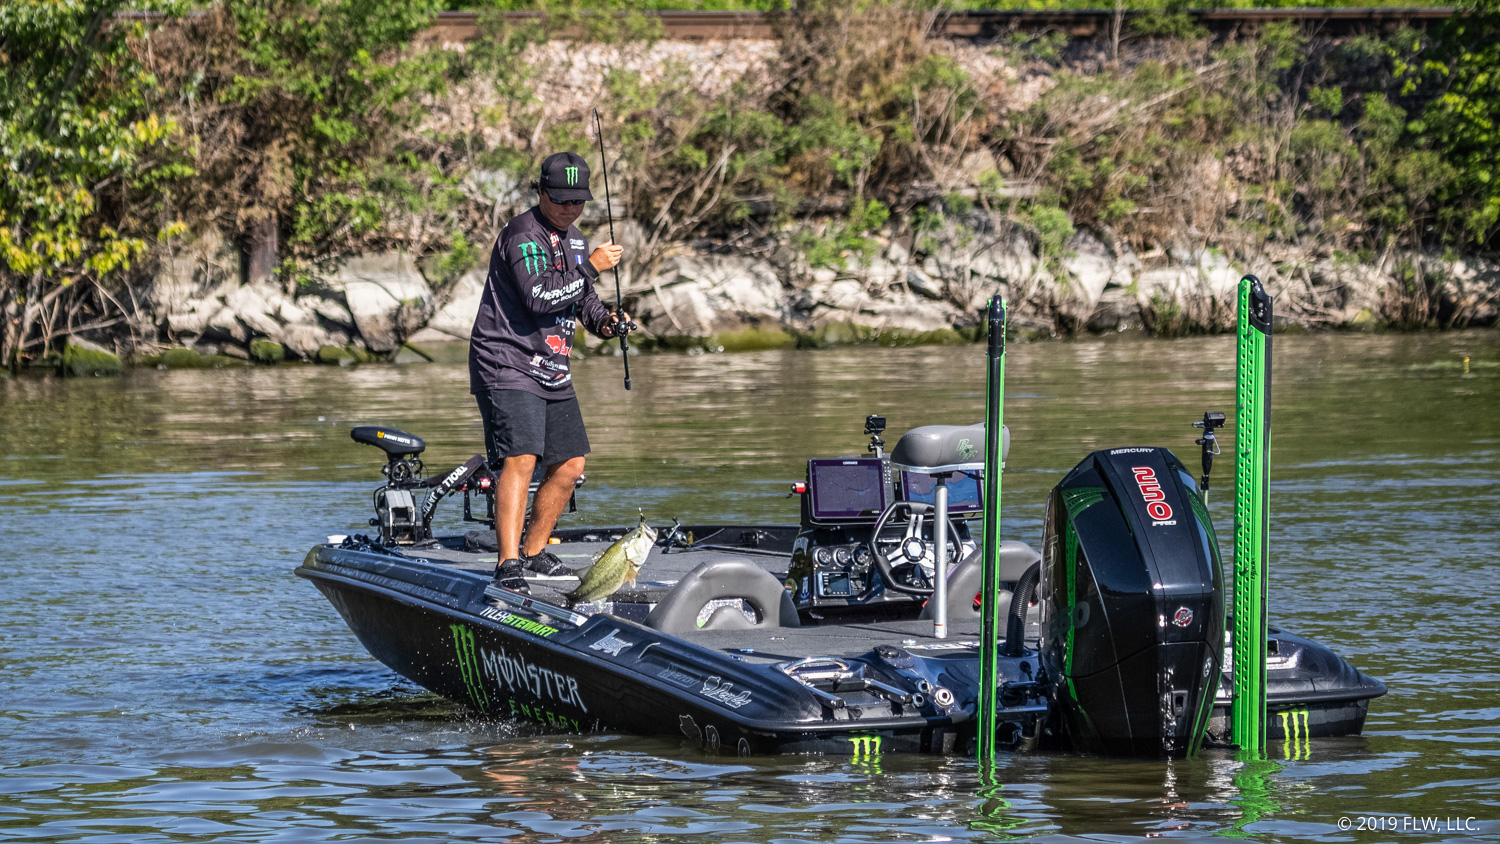 Stewart Holds Lead Following Day Two of FLW Tour Event on Lake Champlain  Presented by T-H Marine - Major League Fishing